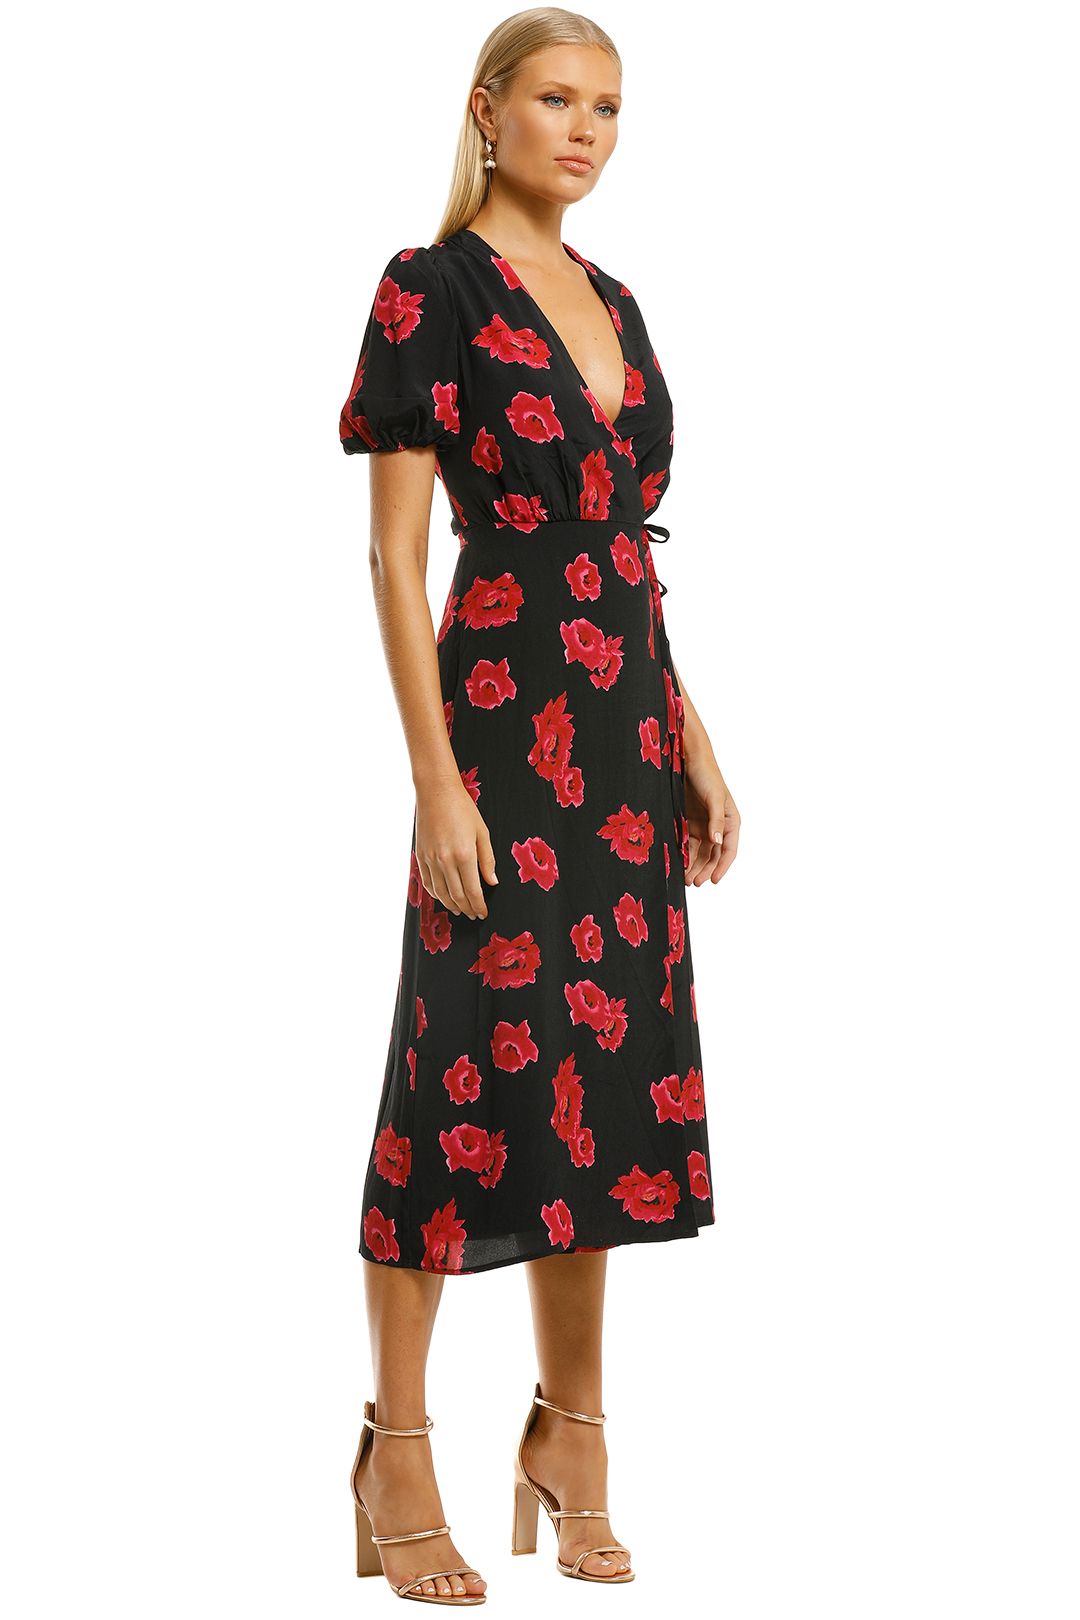 The-East-Order-Imogen-Midi-Dress-Wine-and-Flora-Side